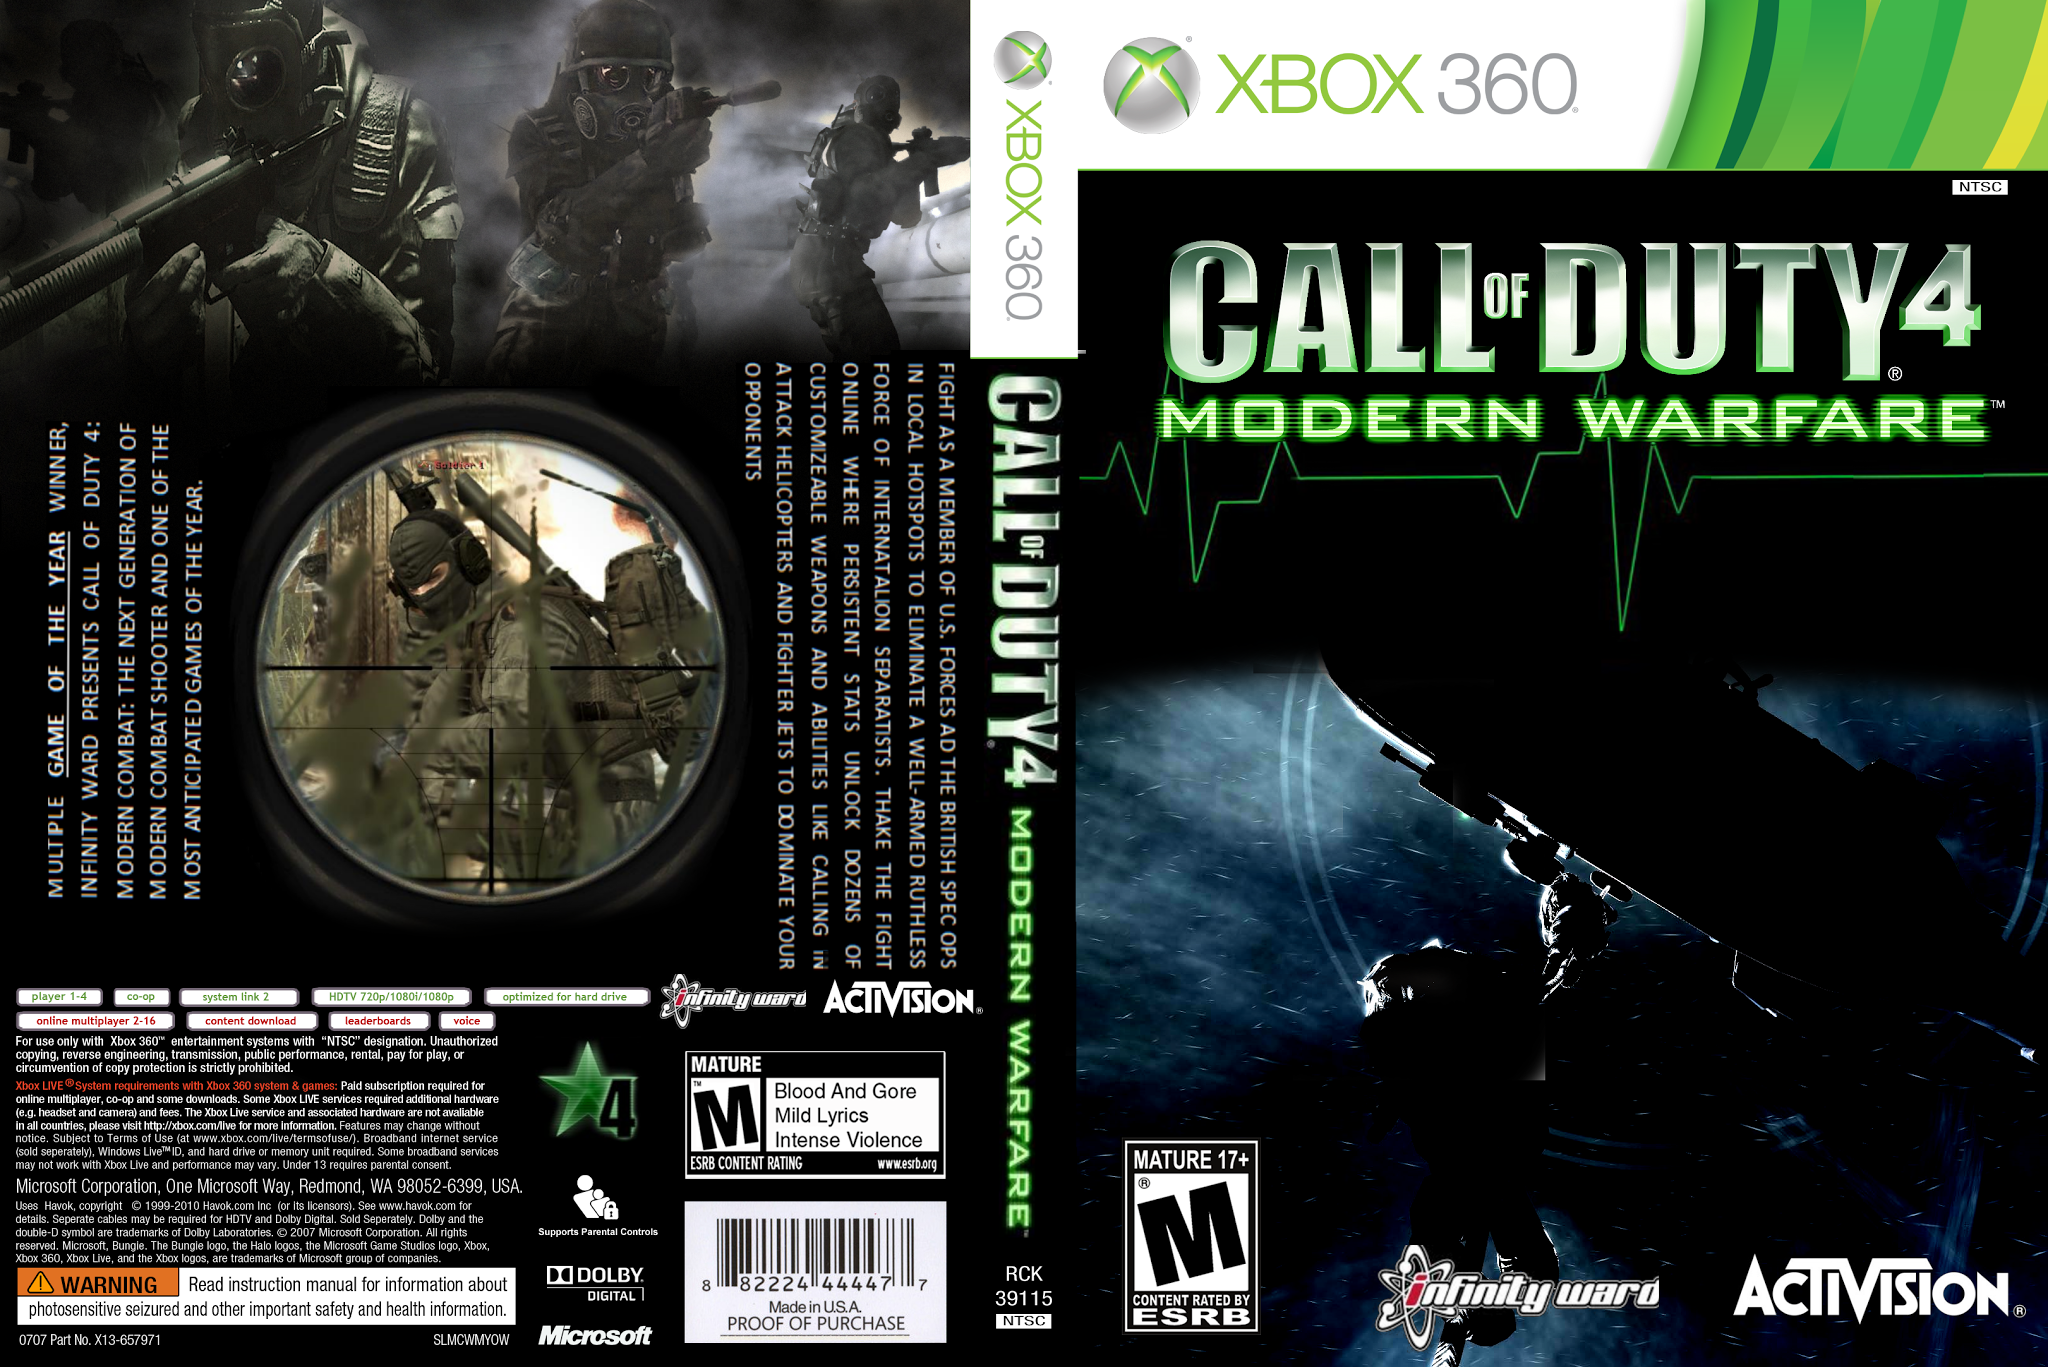 Call of duty xbox game. Call of Duty 4 Xbox 360 диск. Диск Cod 4 MW Xbox 360. Call of Duty 4 Modern Warfare диск Xbox 360. Call of Duty Modern Warfare 1 диск на Xbox 360.